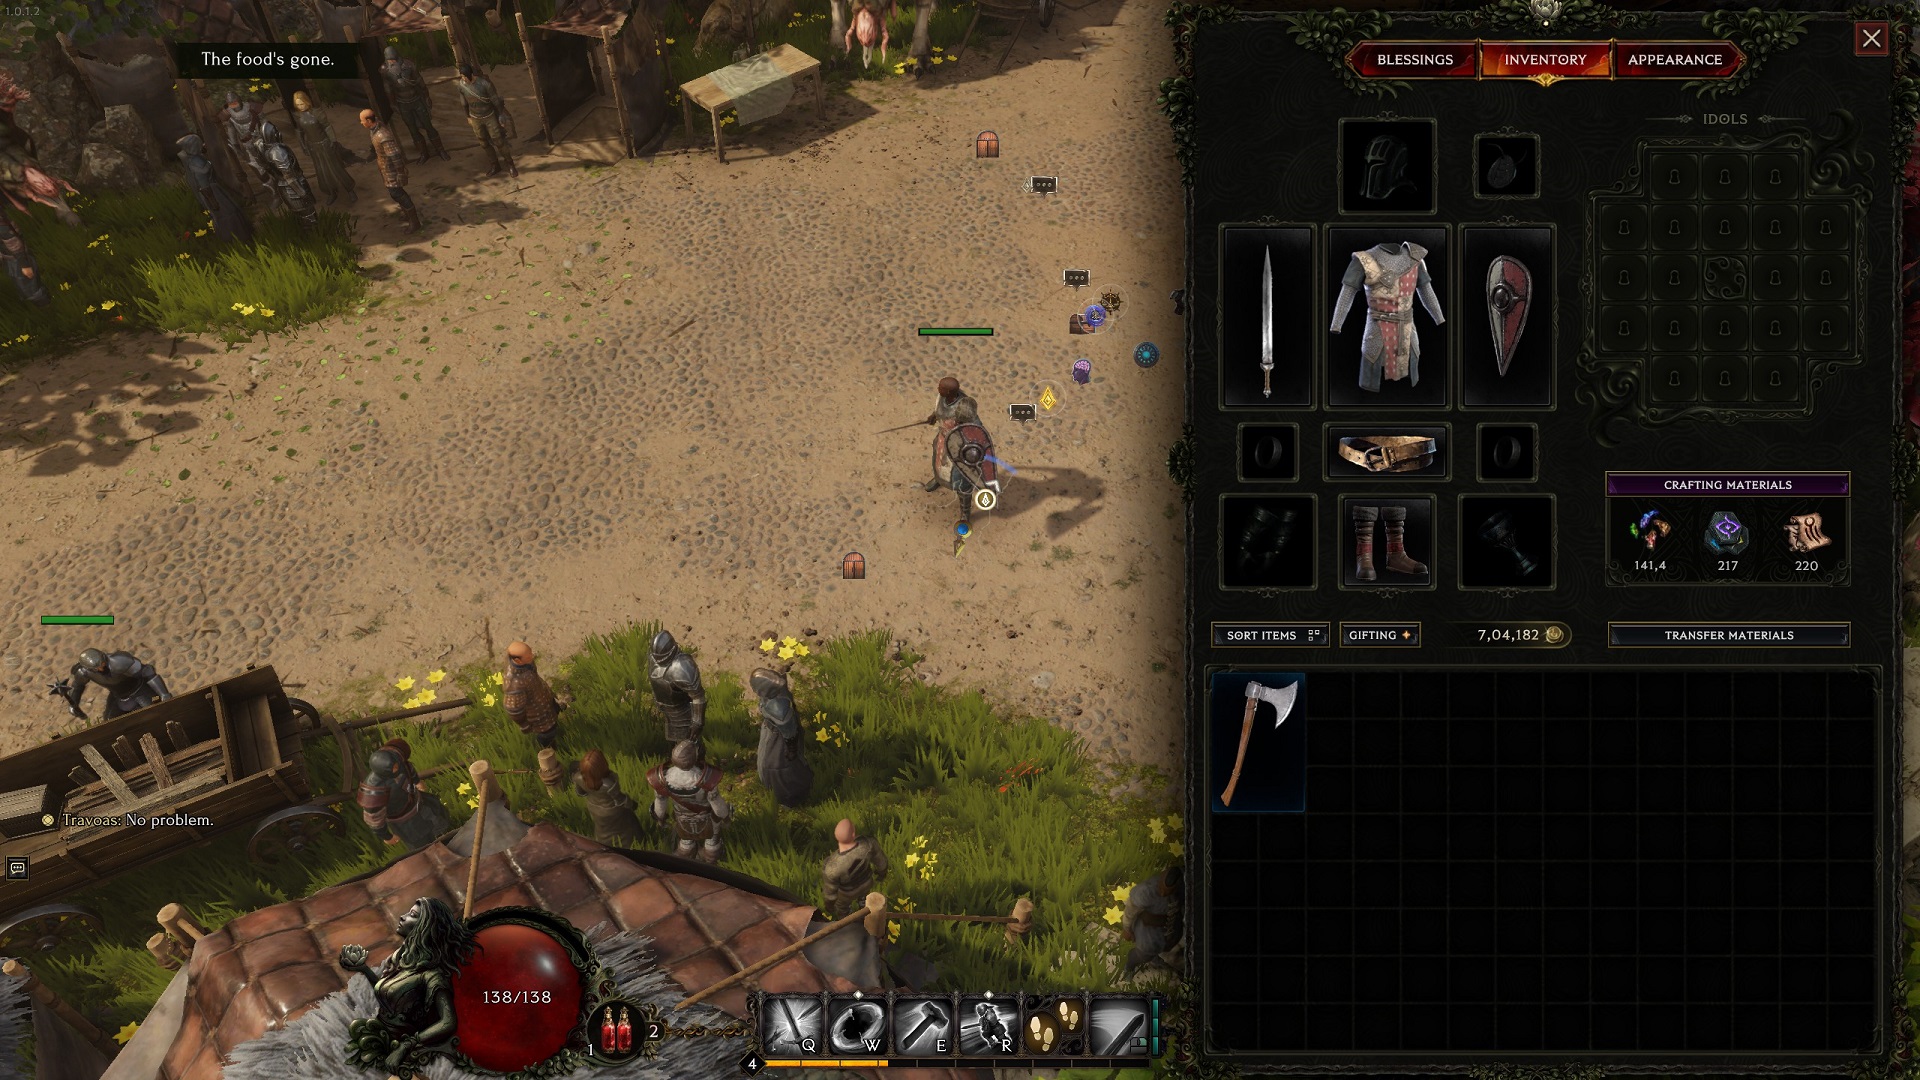 An image of the Sentinel's inventory in Last Epoch.